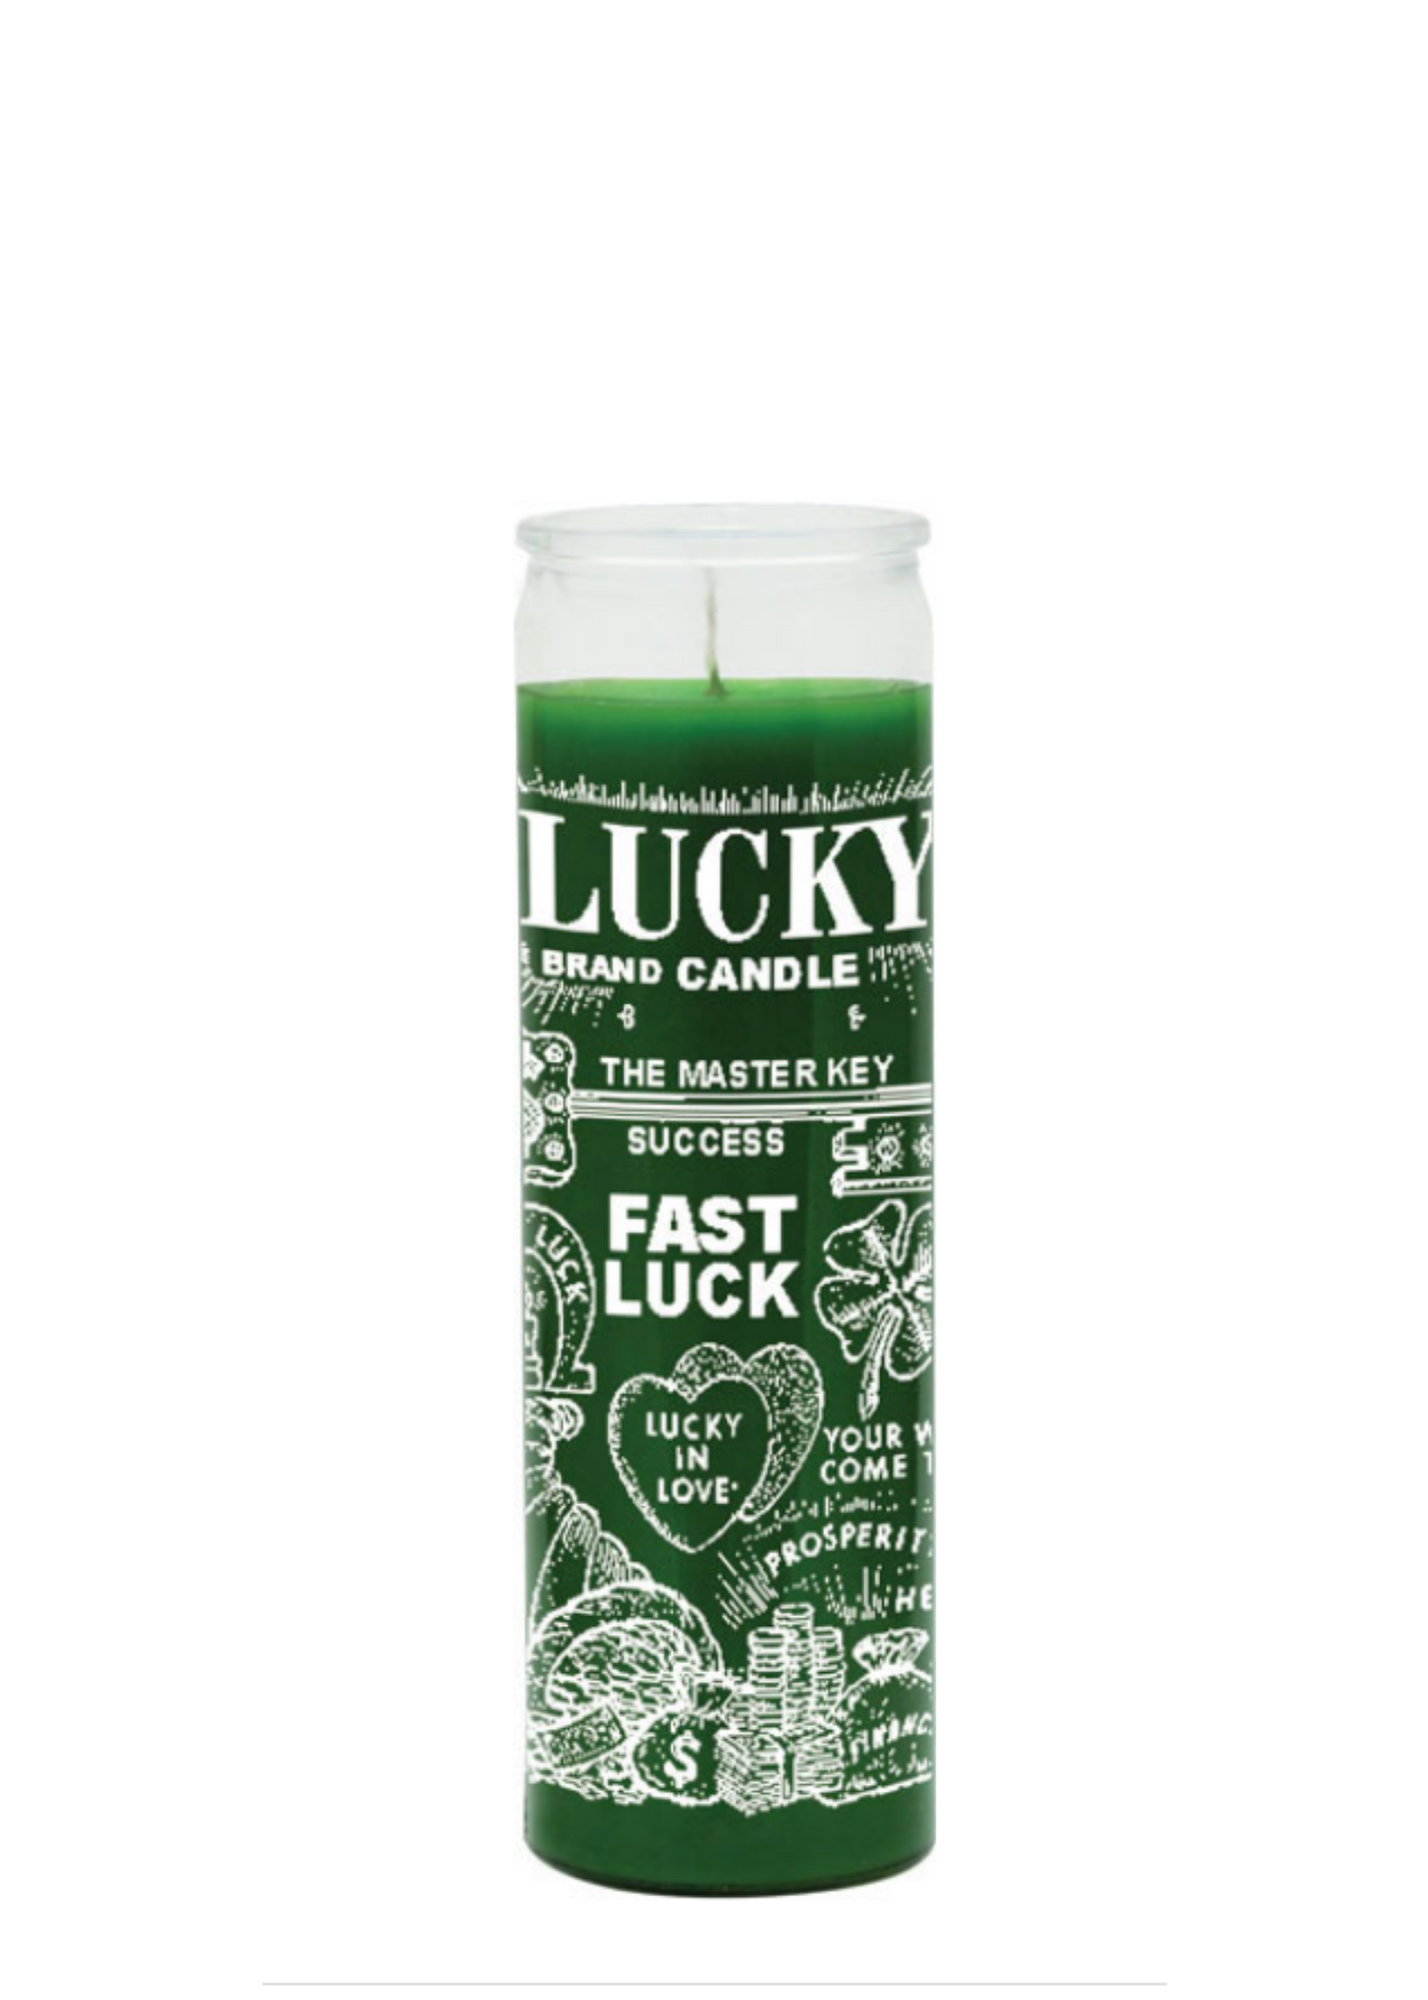 FAST LUK (Green) 1 COLOR 7 DAY CANDLE